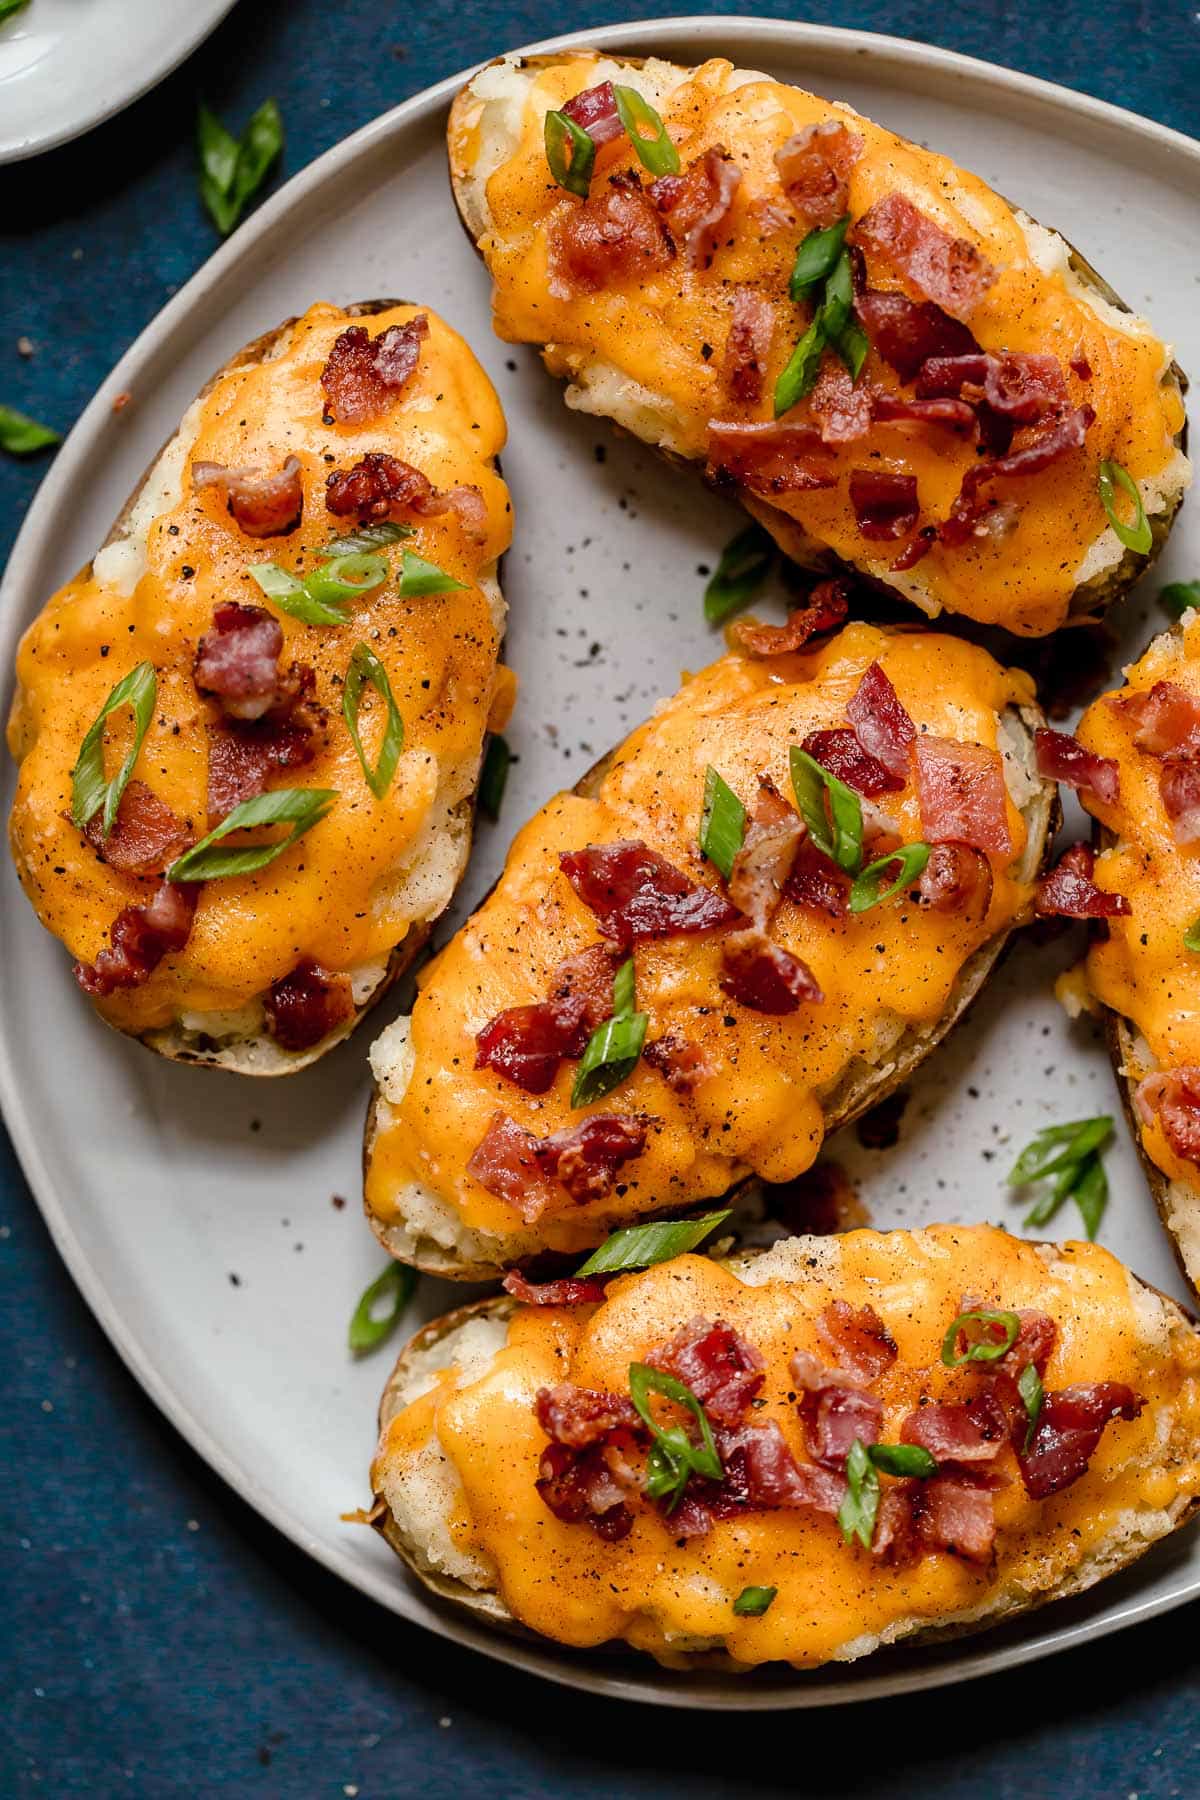 Overhead image of four Twice Baked Potatoes on a white serving plate. Potato skins are filled with mashed potatoes, topped with melted cheddar cheese and garnished with bacon and green onions.